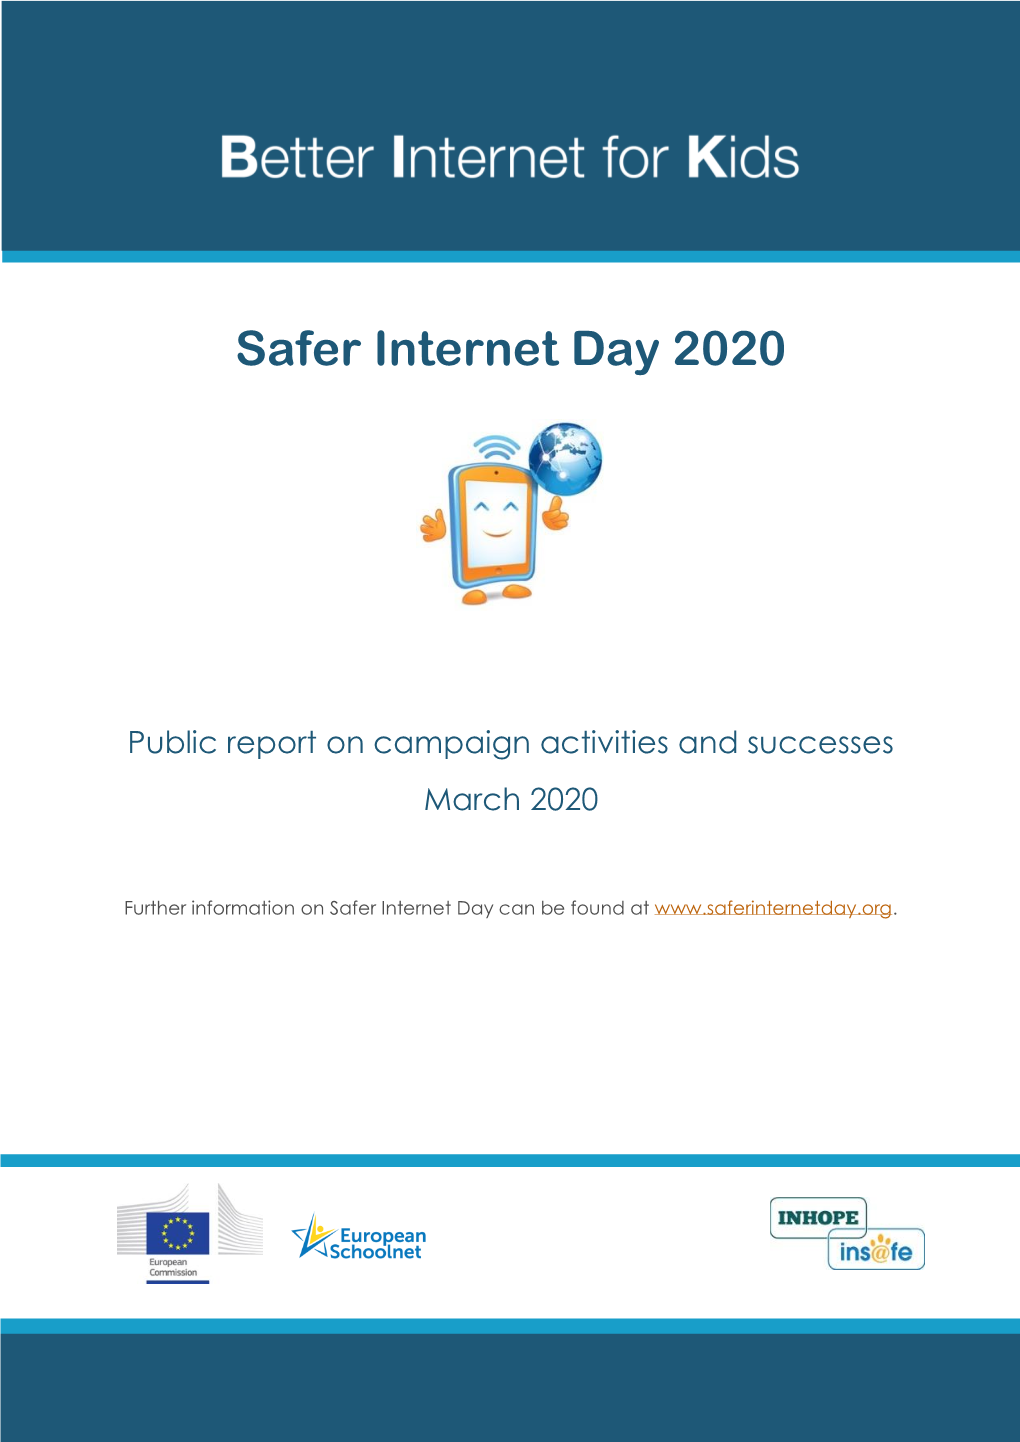 Safer Internet Day 2020 Public Report, March 2020